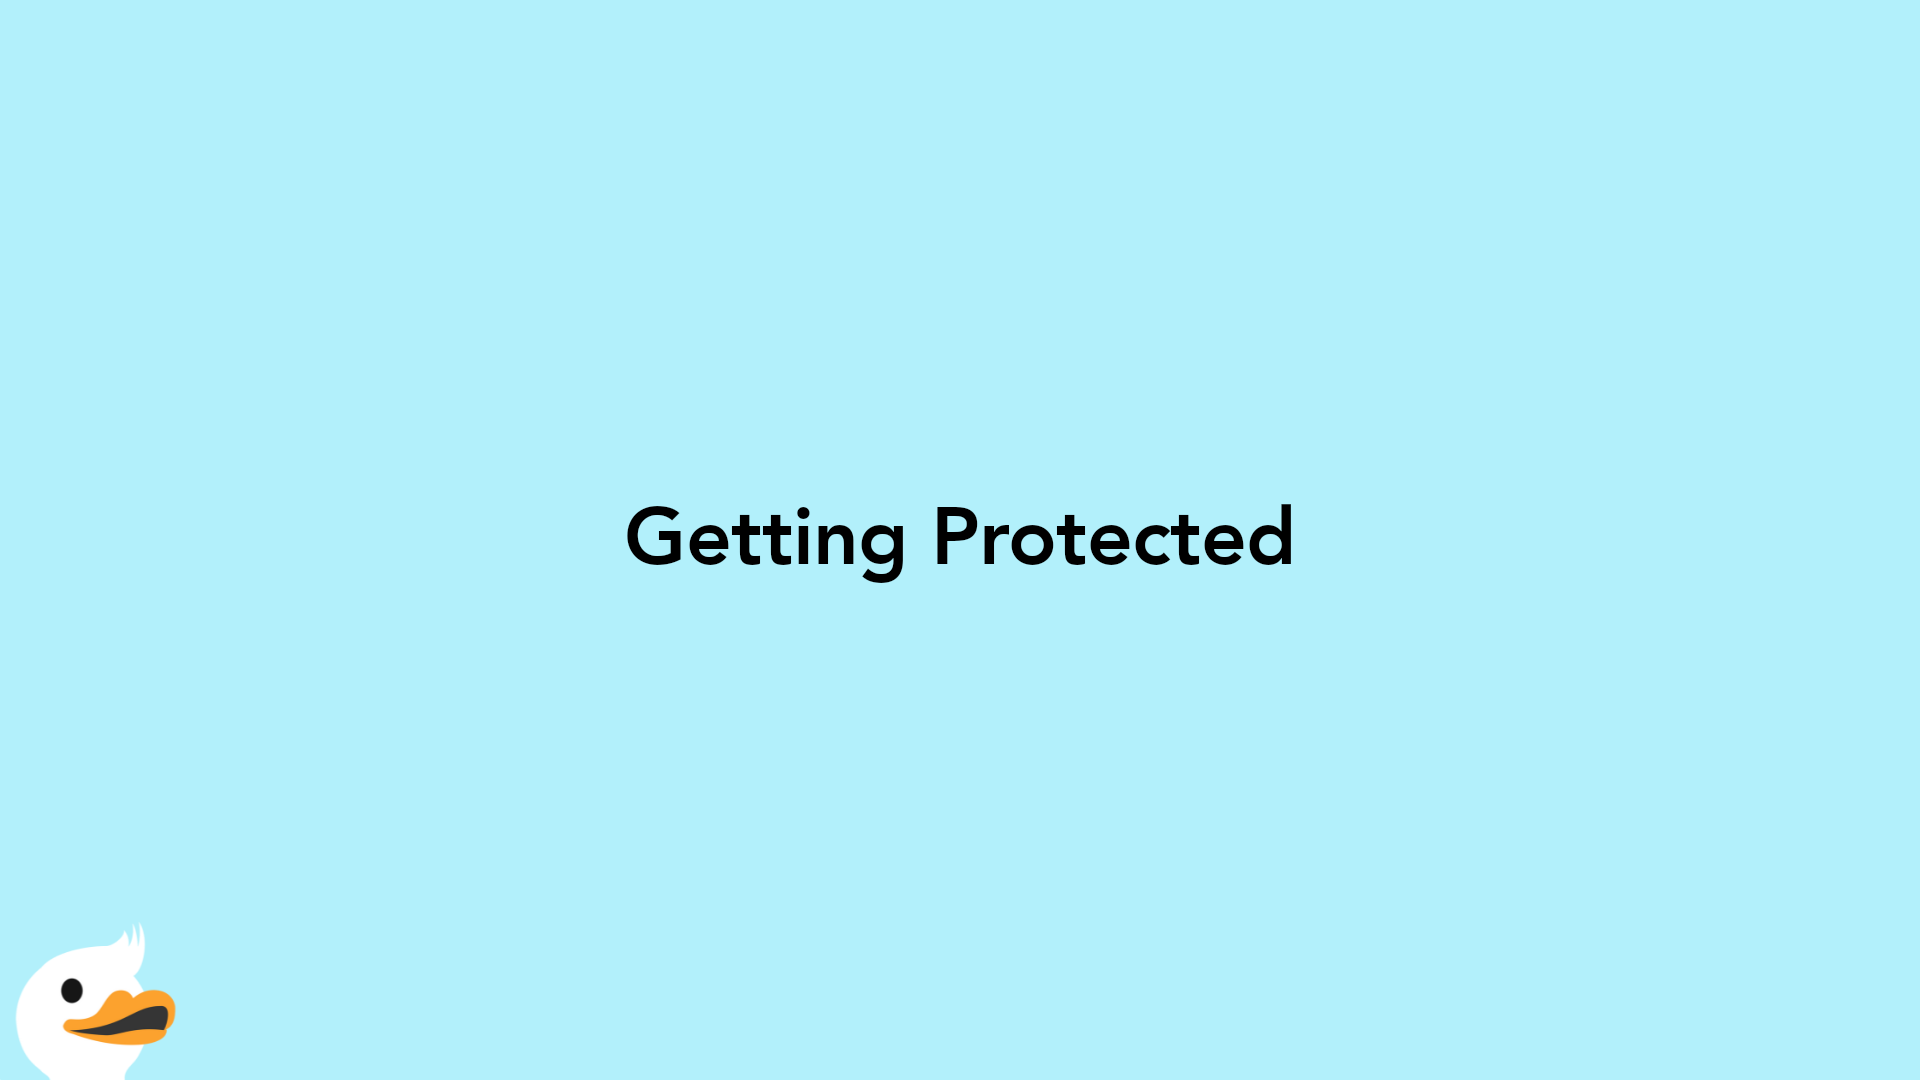 Getting Protected